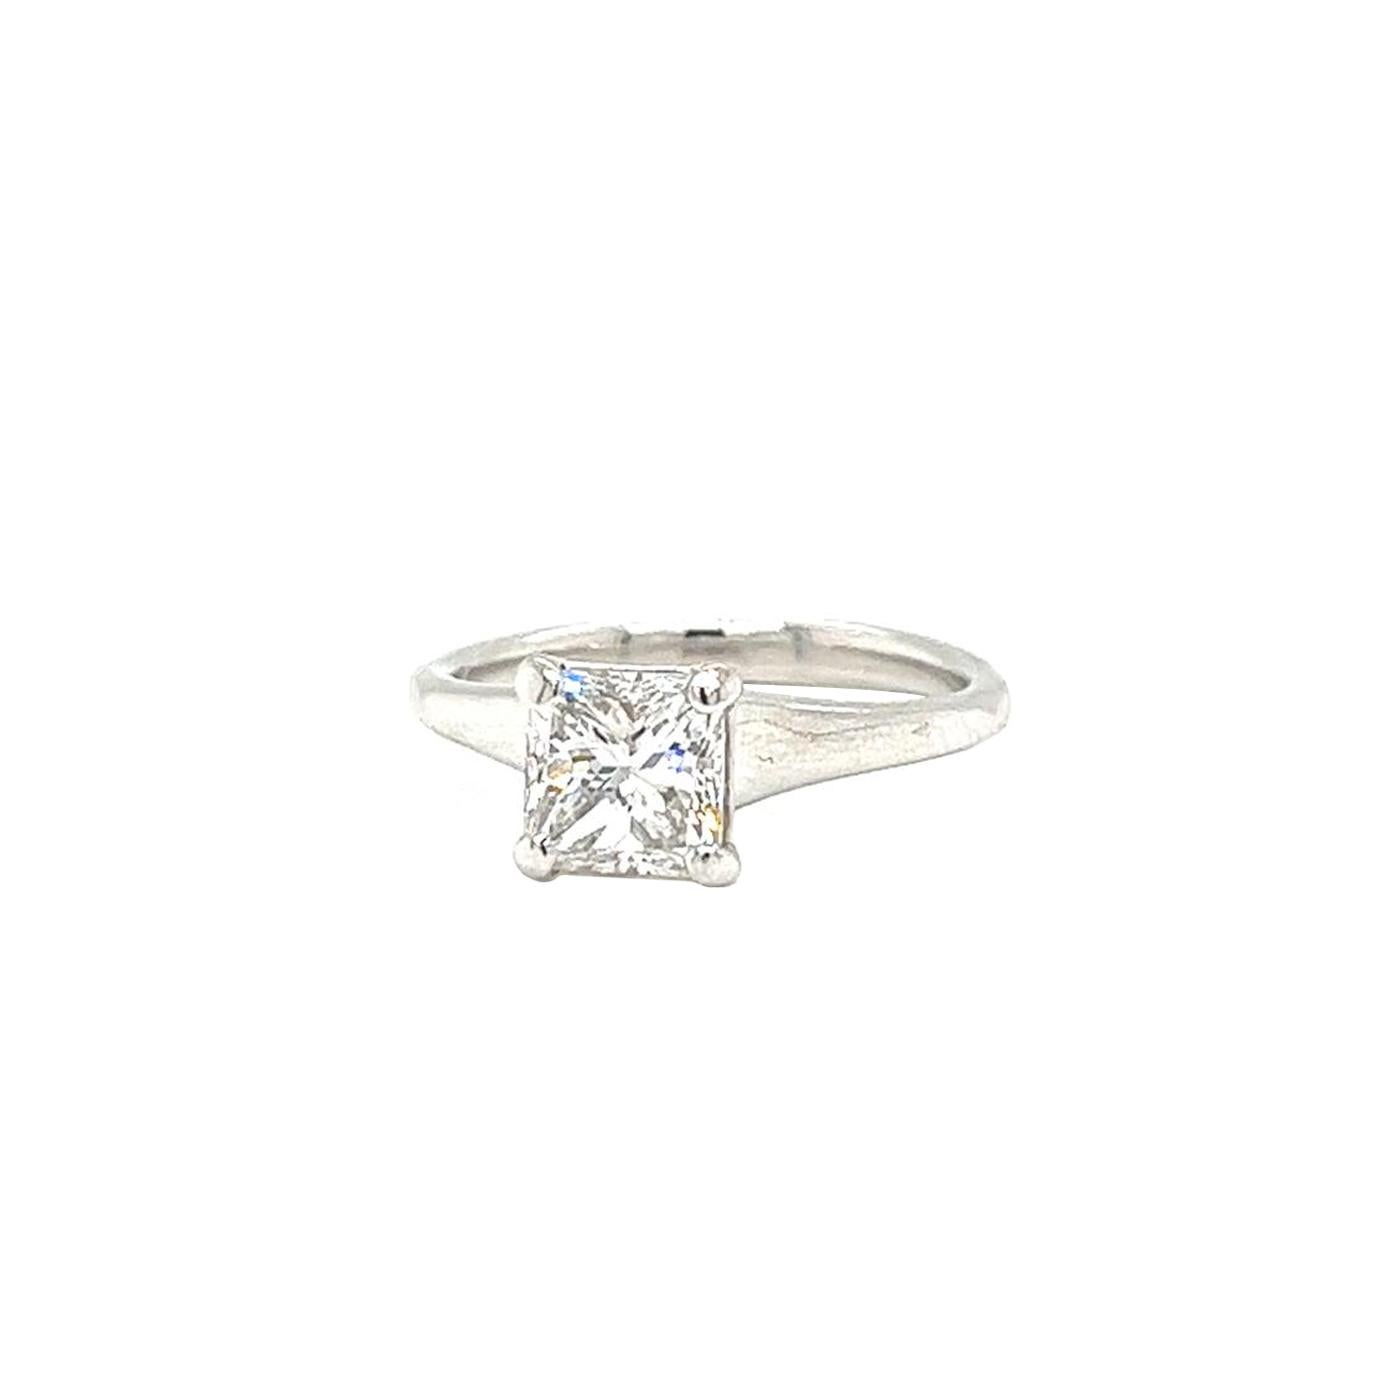 Modernist GIA 1.50ct Natural Princess Cut Diamond Engagement Ring in Platinum VS2 Clarity For Sale